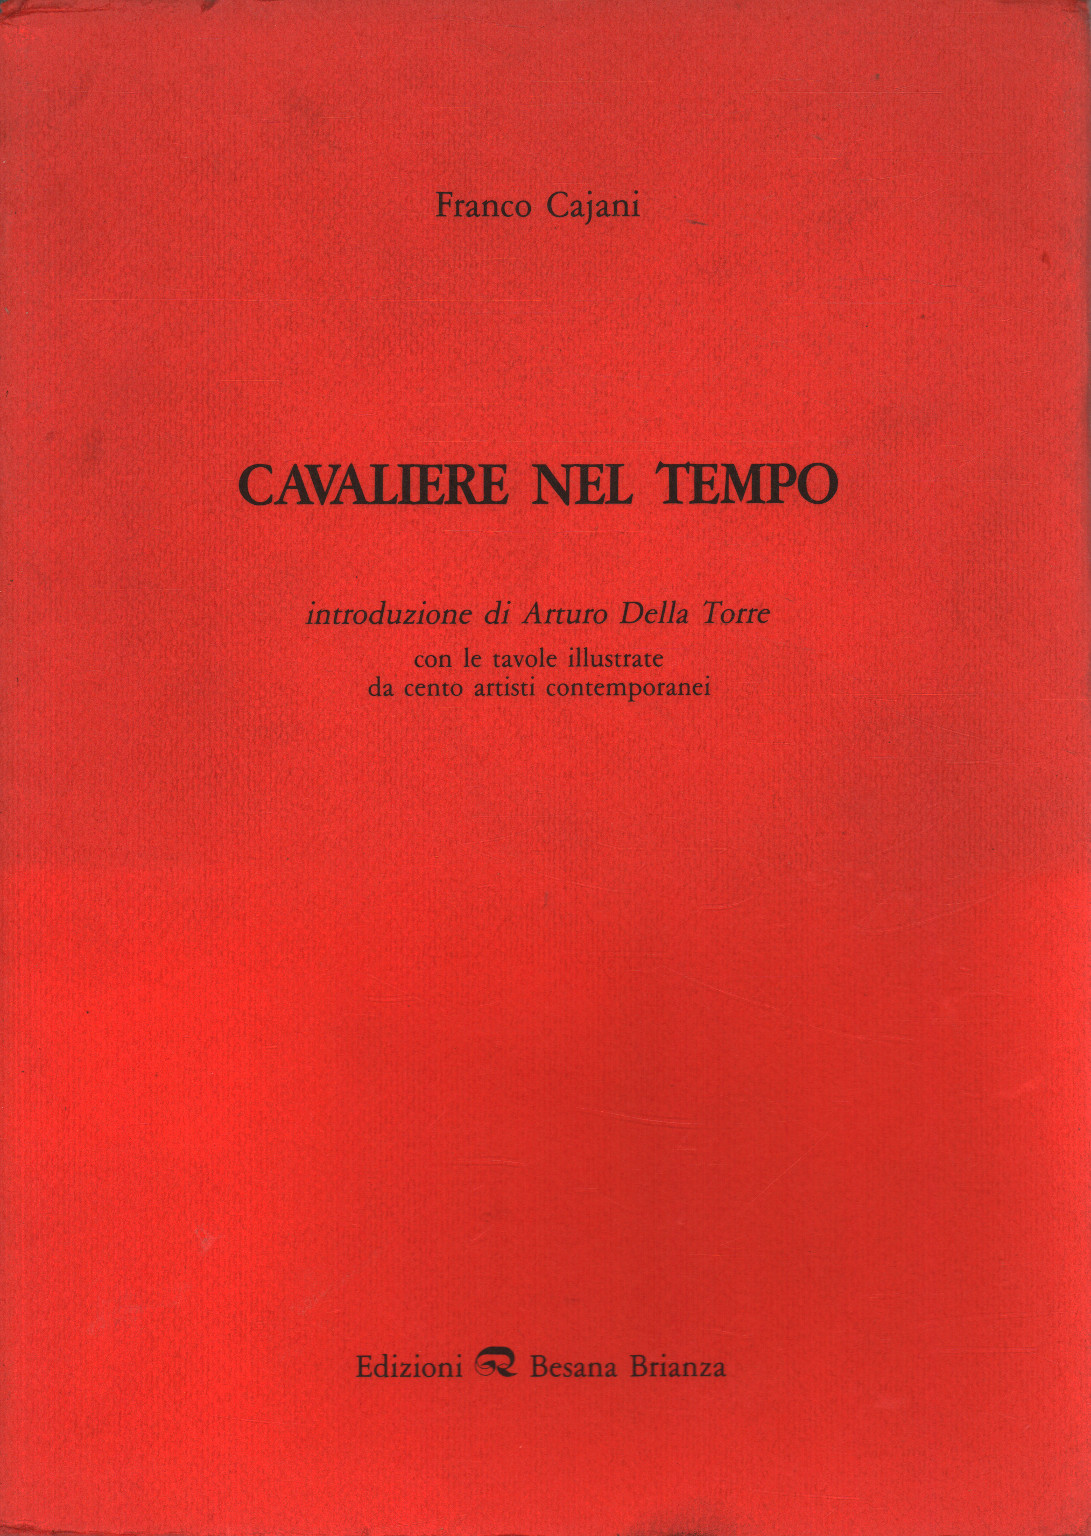 Knight in time (1987-1988), s.a.